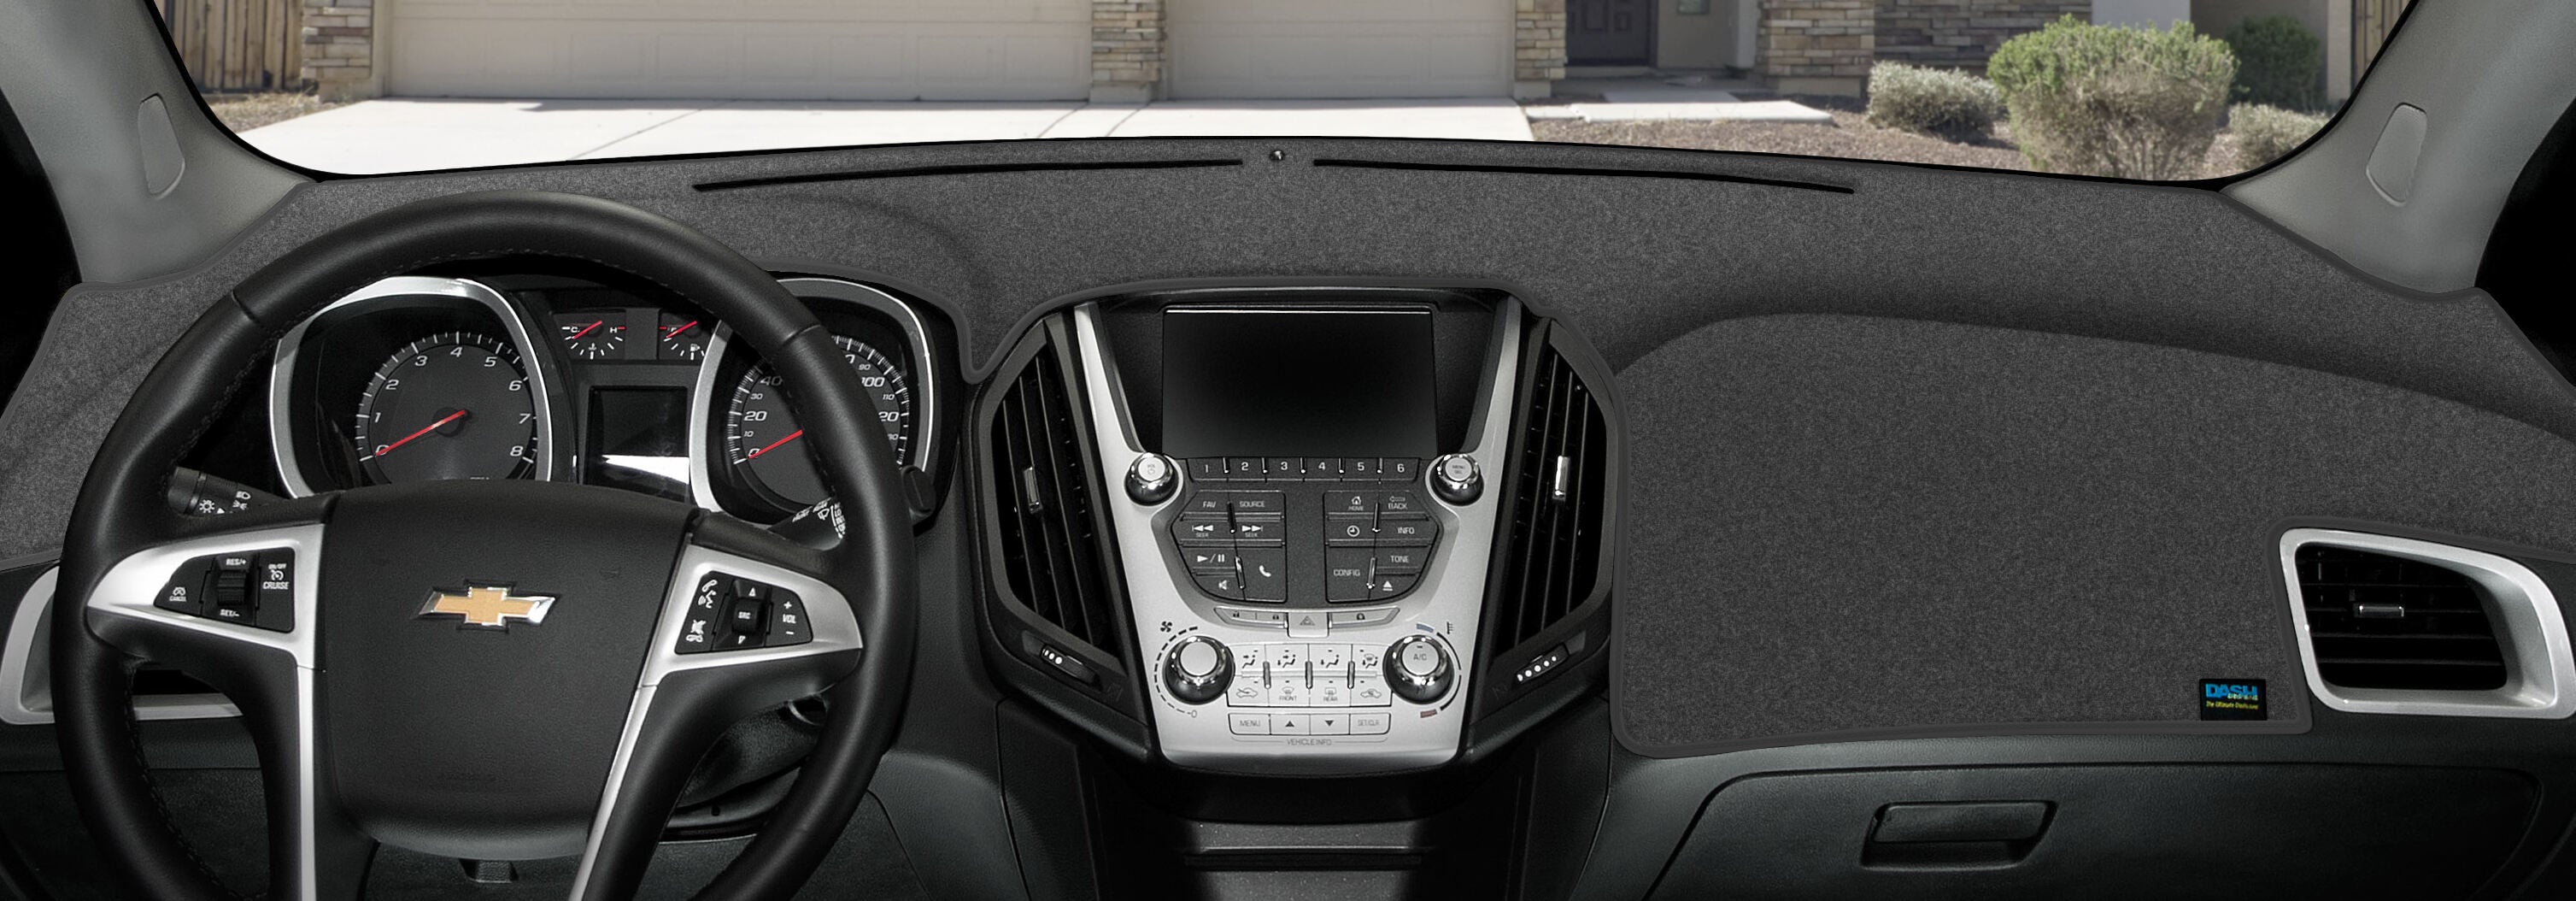 Enhance Your Dashboard with Custom-Fit Dash Covers for Optimal Style and Protection